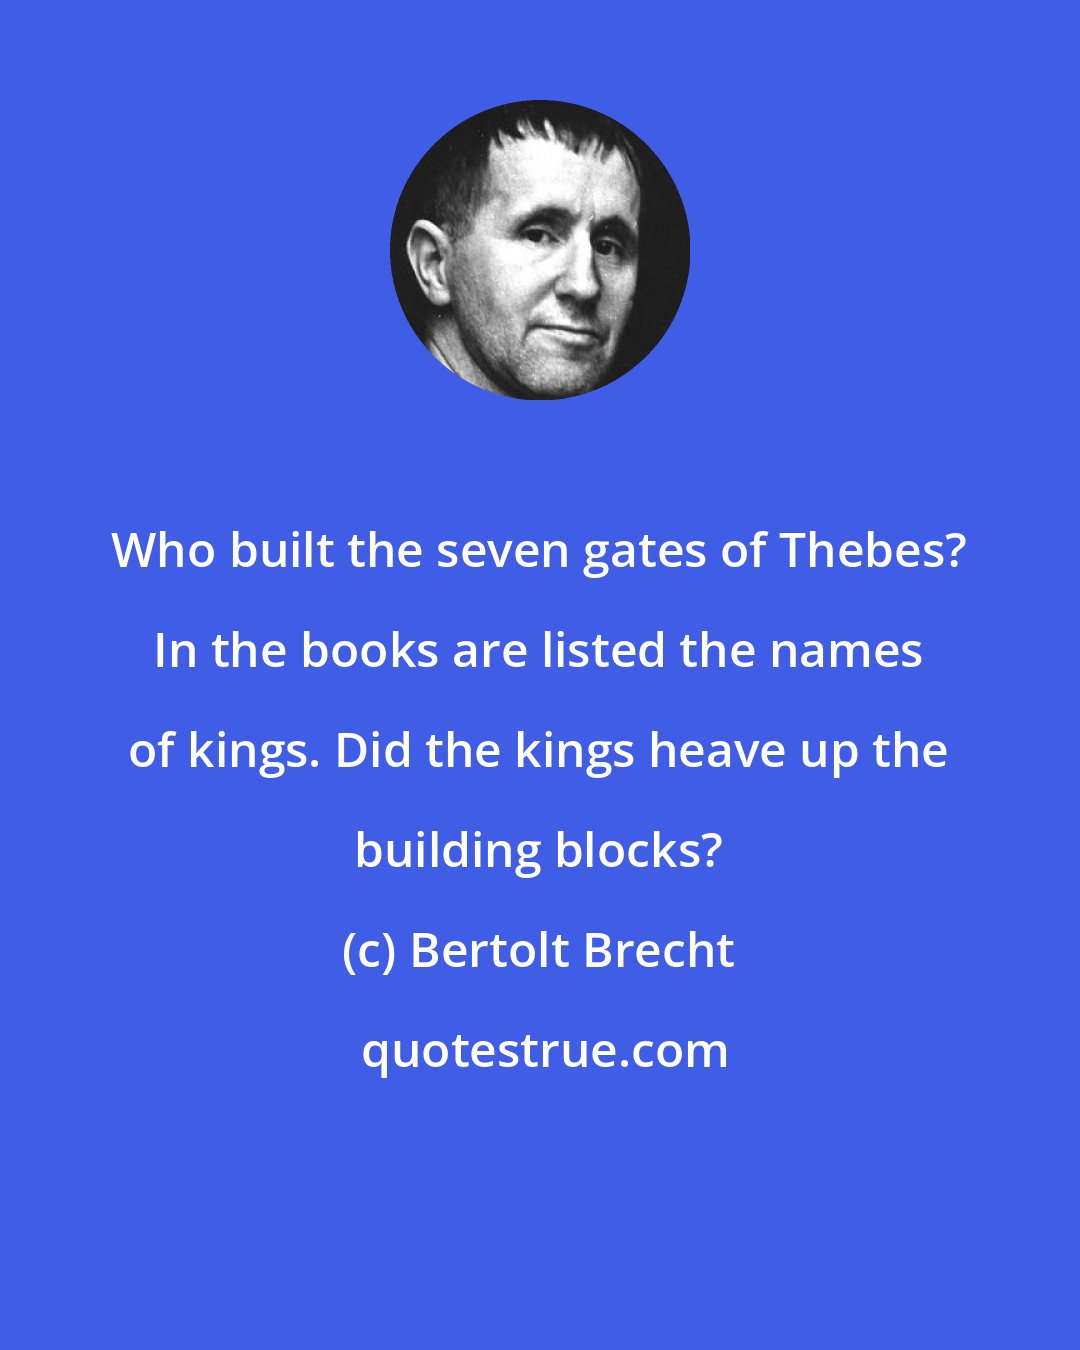 Bertolt Brecht: Who built the seven gates of Thebes? In the books are listed the names of kings. Did the kings heave up the building blocks?